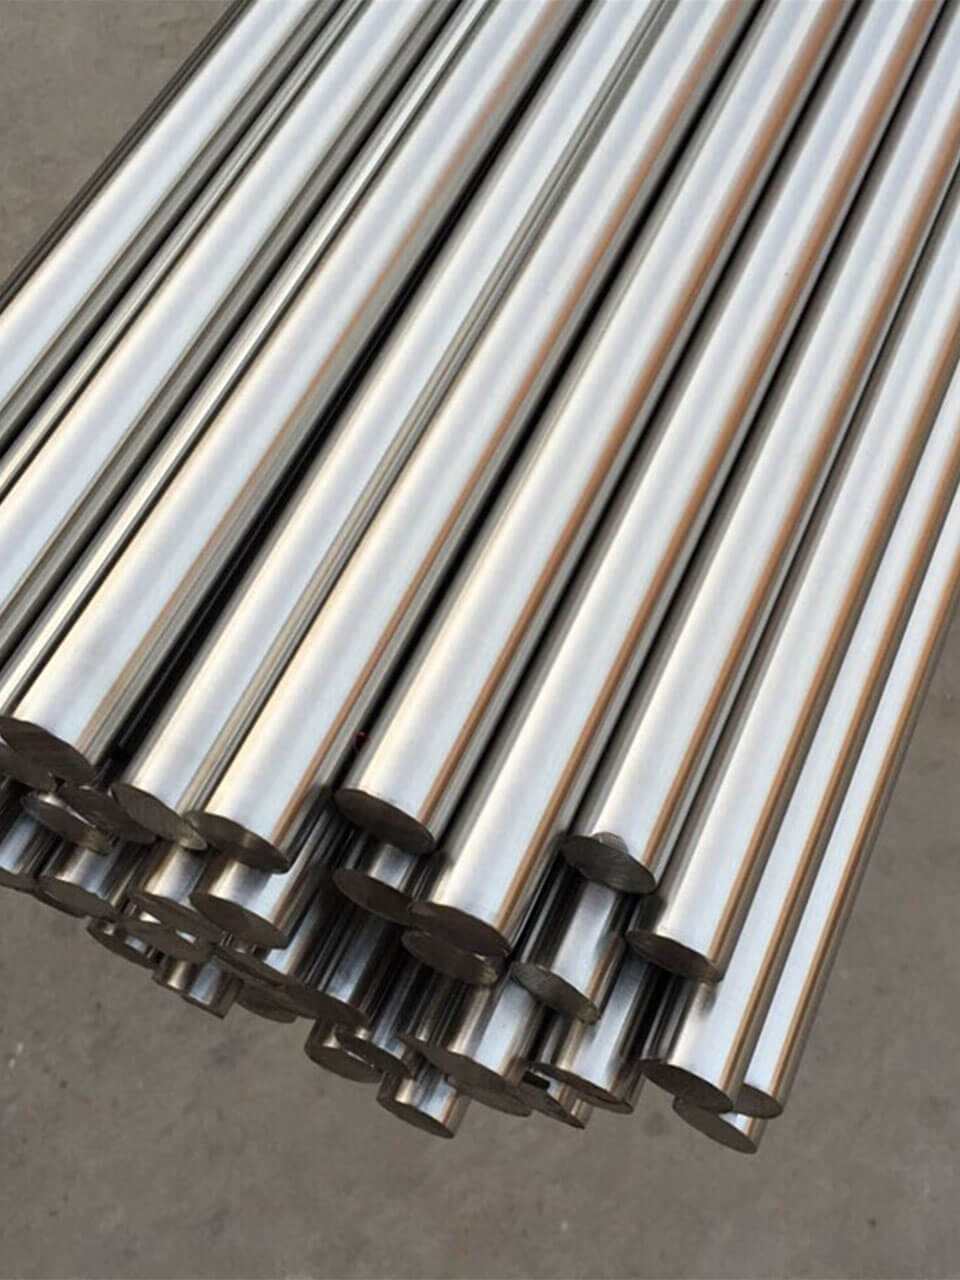 Understanding the Difference Between Steel and Stainless Steel